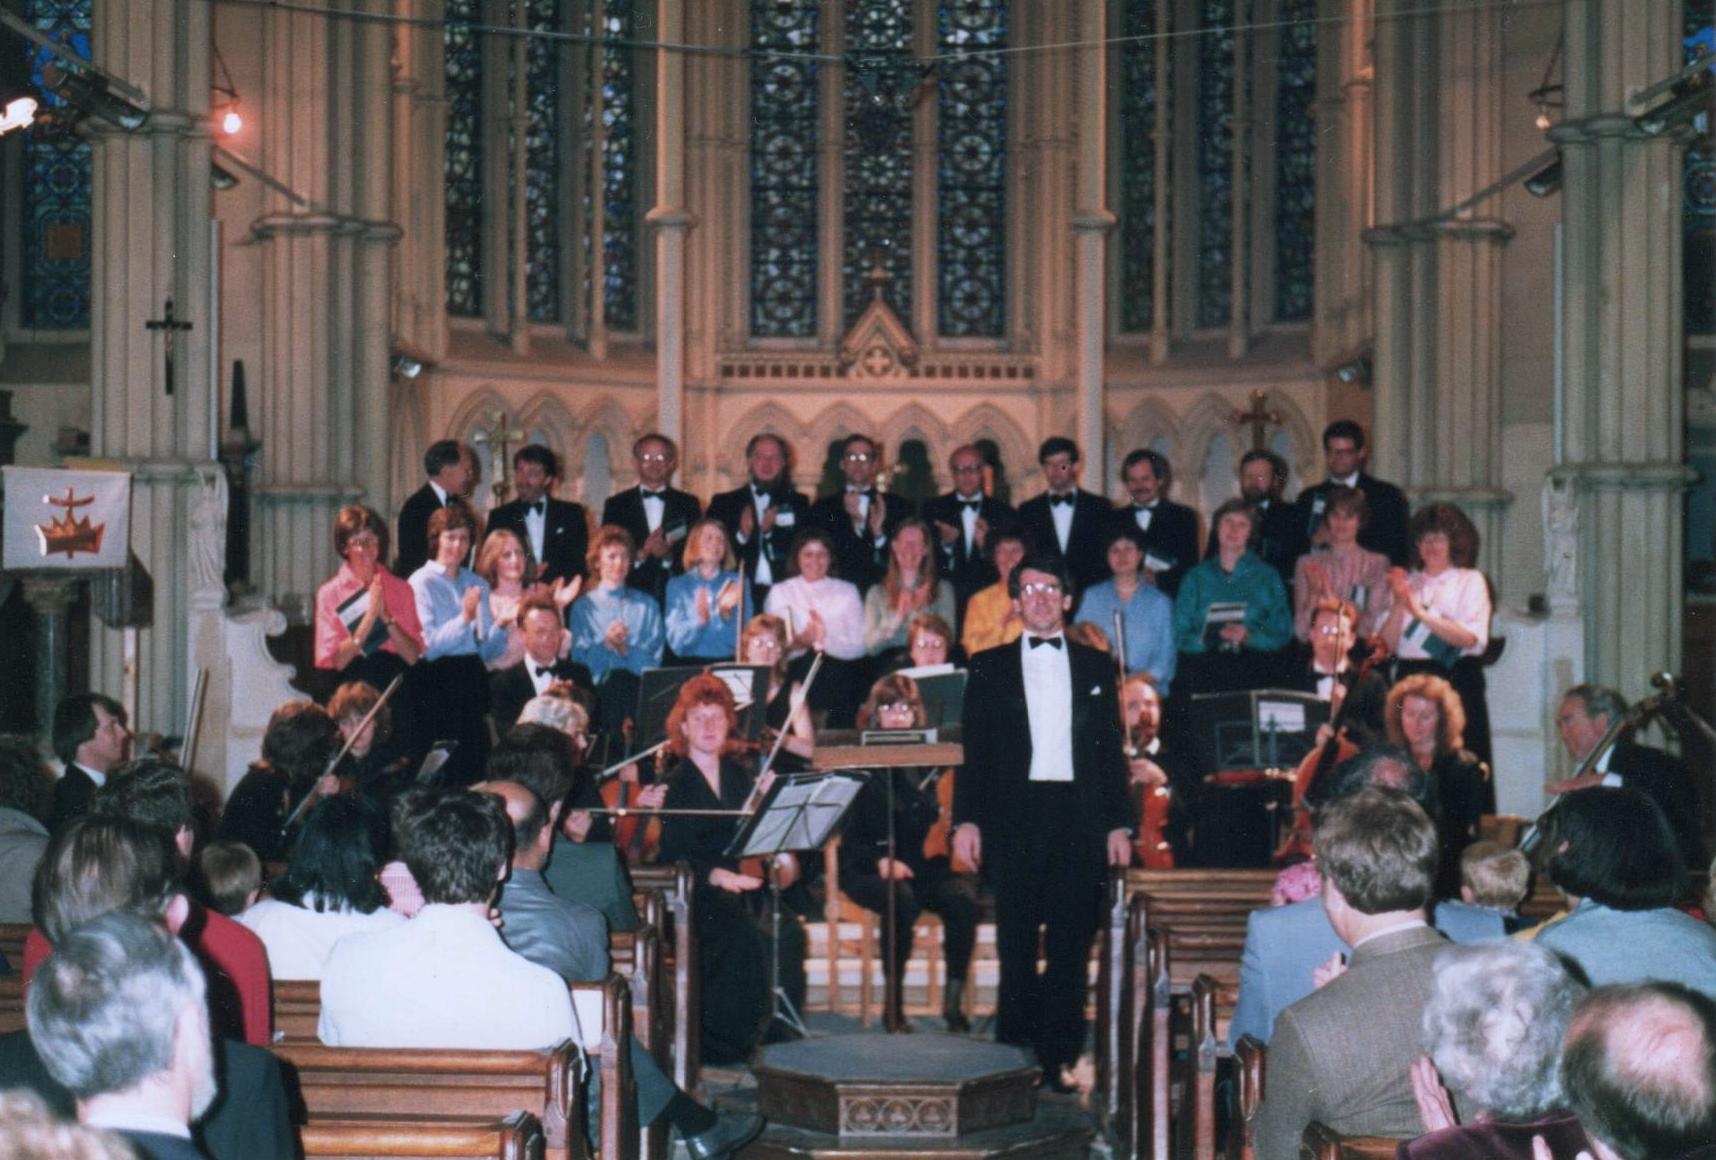 With Le Corde orchestra at St Mary's, Andover (July 1988)